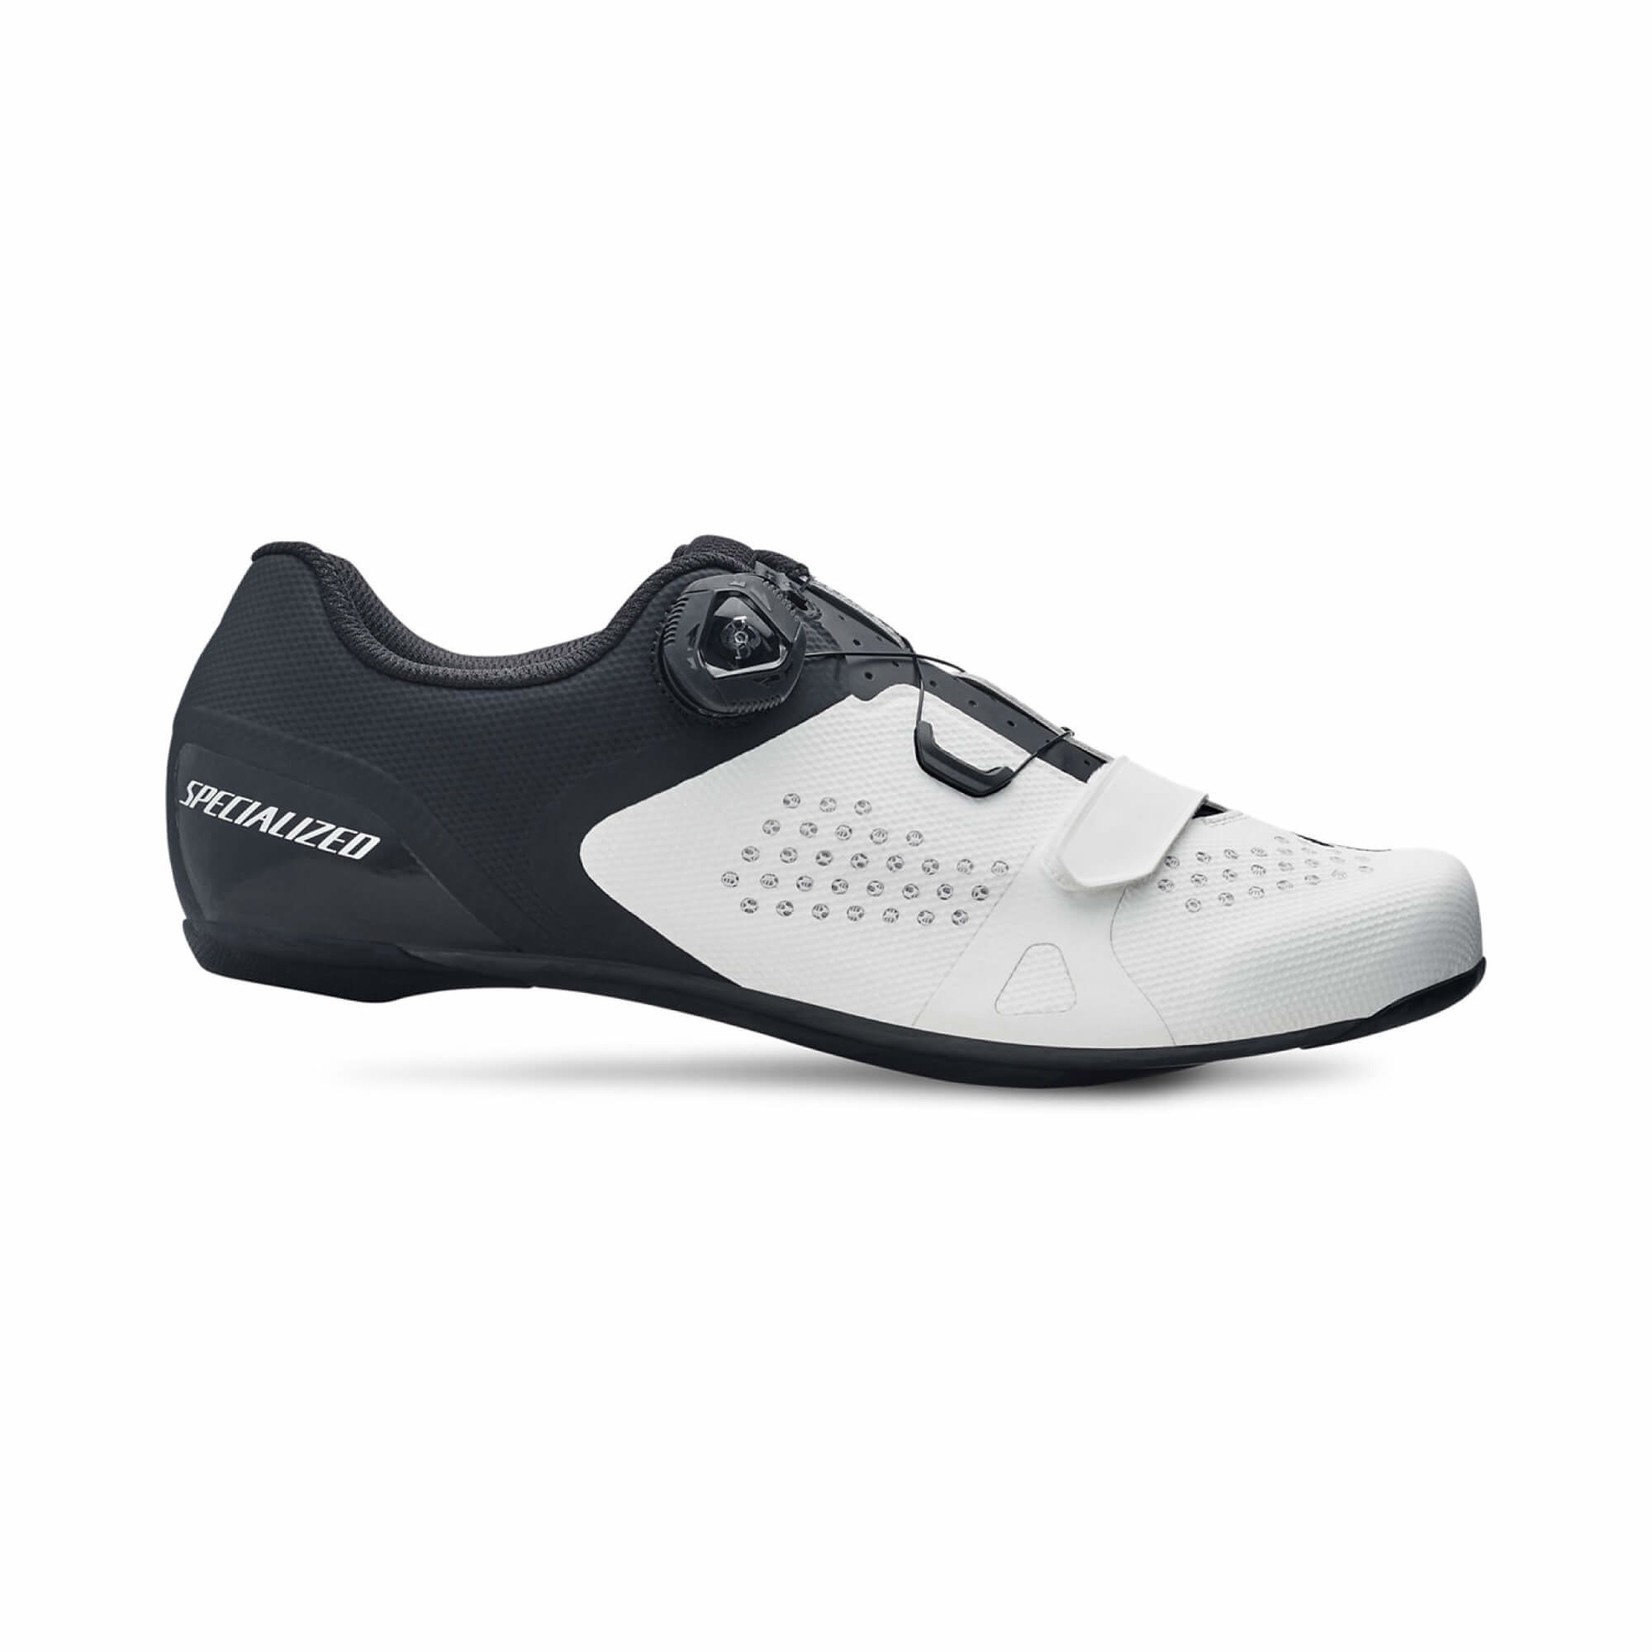 SPECIALIZED SPECIALIZED TORCH 2.0 ROAD SHOE